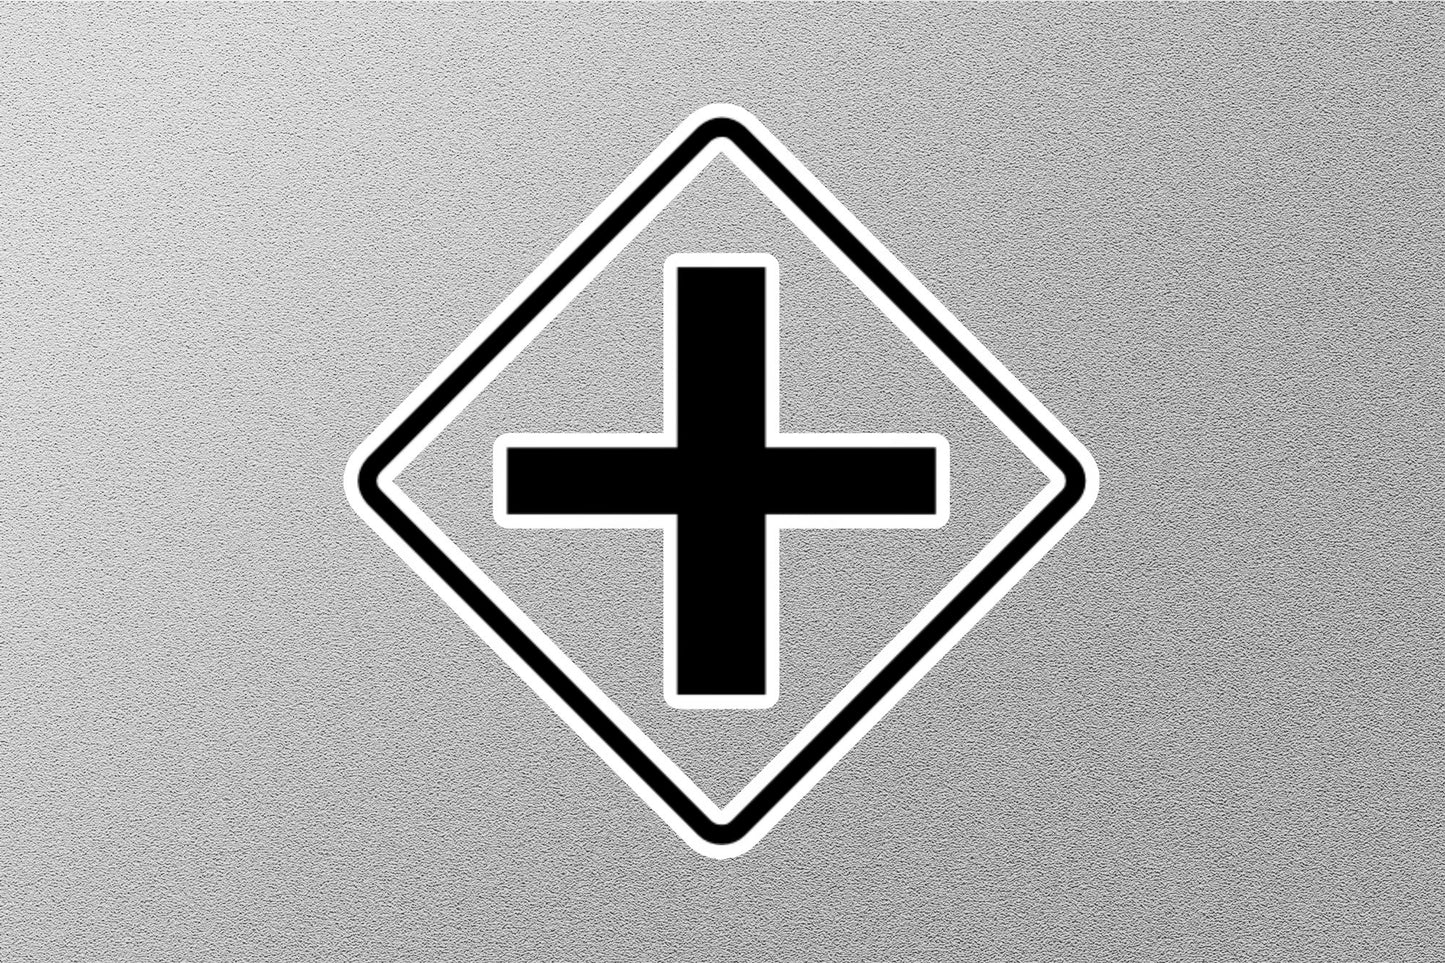 Four Way Intersection sign Sticker